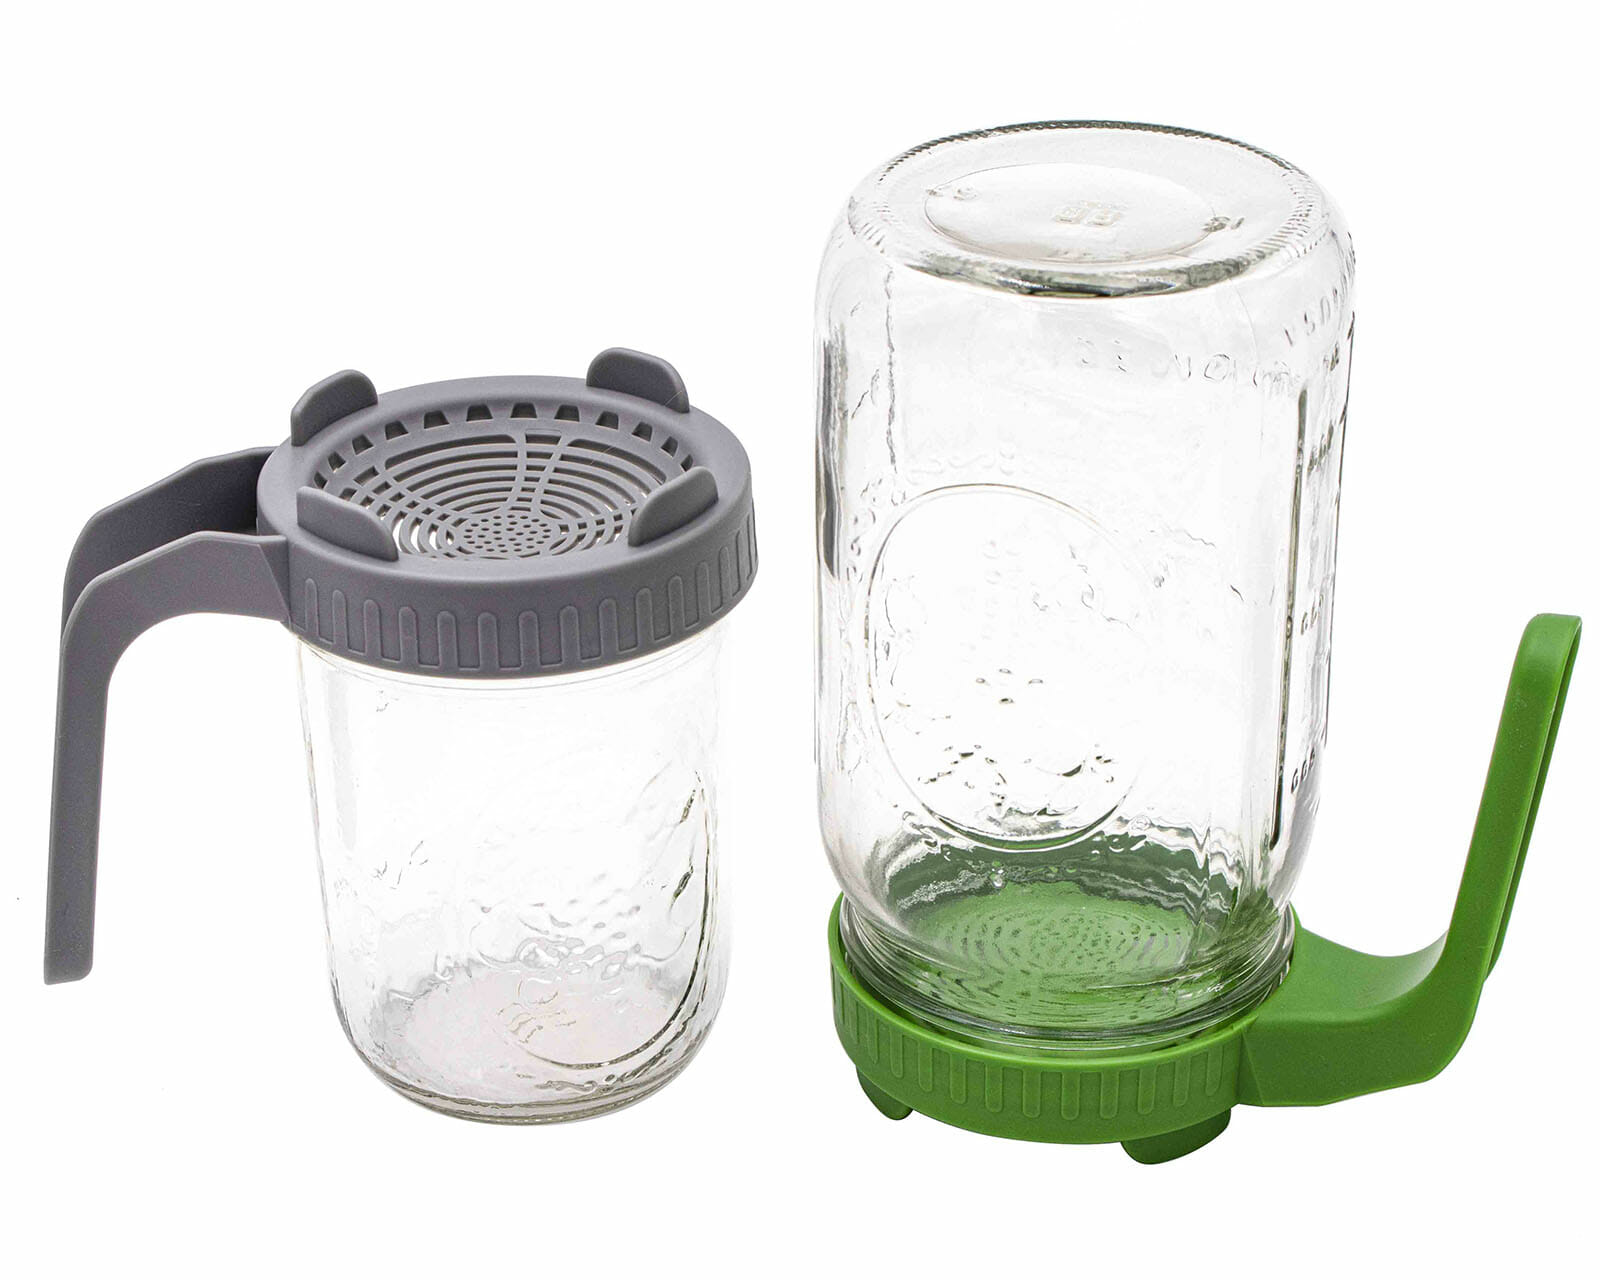 gray and green wide mouth plastic sprouting lids with handle on 16oz pint and 32oz quart